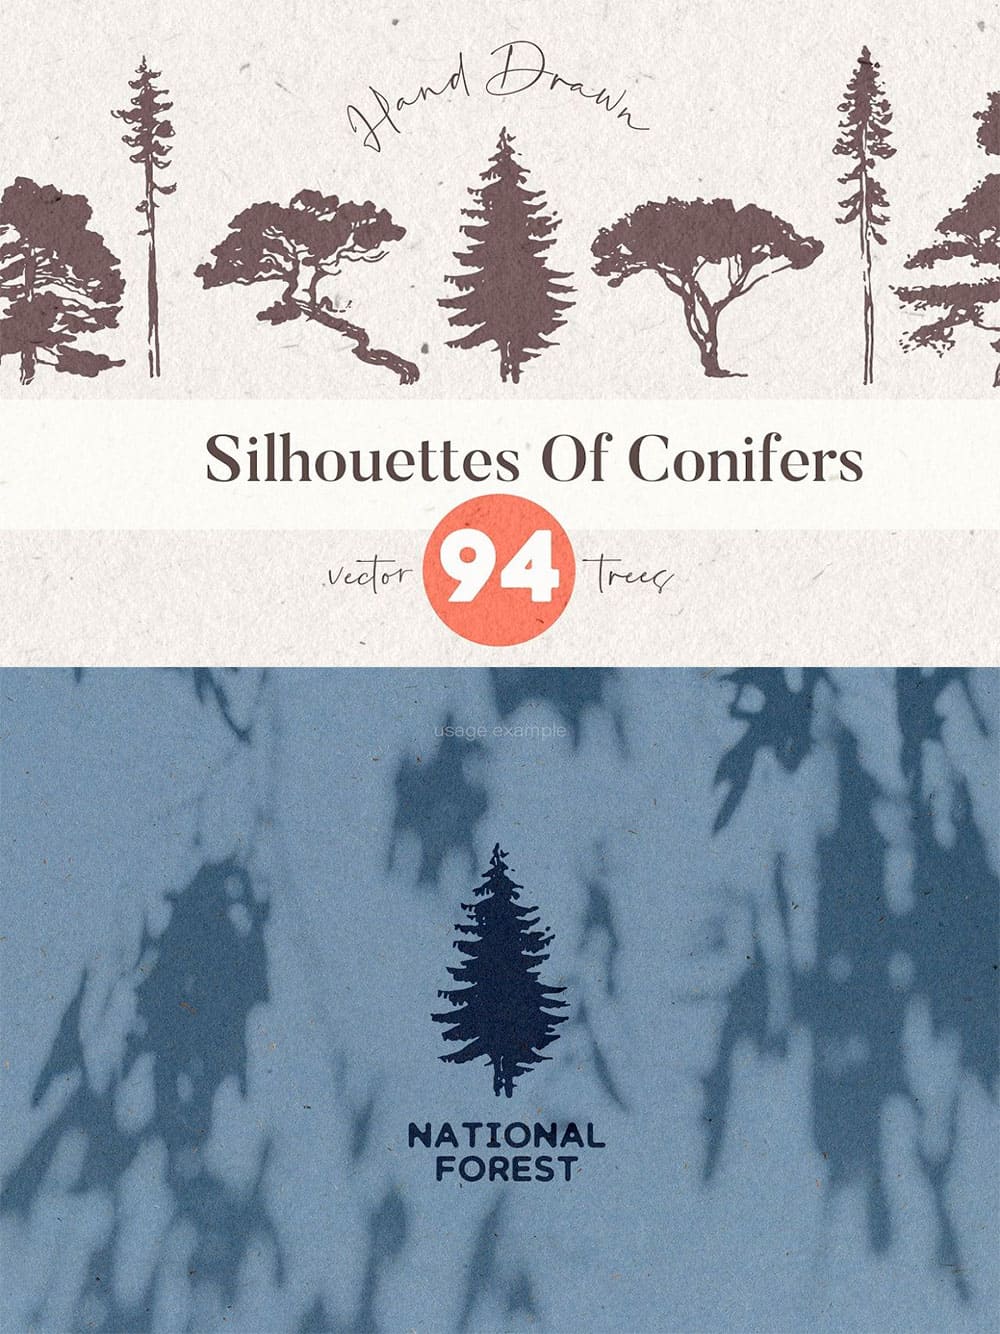 Silhouettes of pine and fir trees, picture for pinterest.